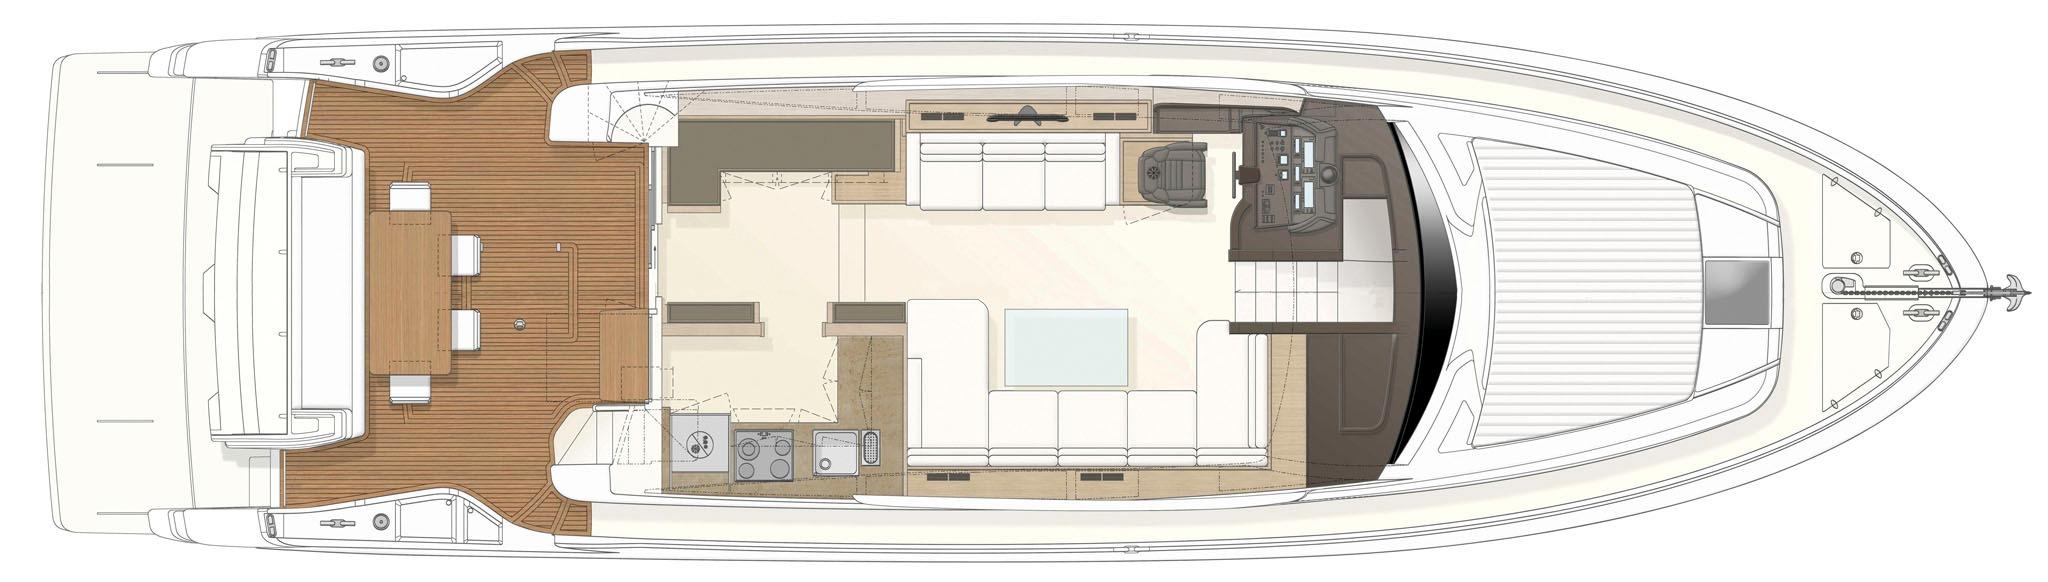 Manufacturer Provided Image: Ferretti 650 Deck Layout Plan